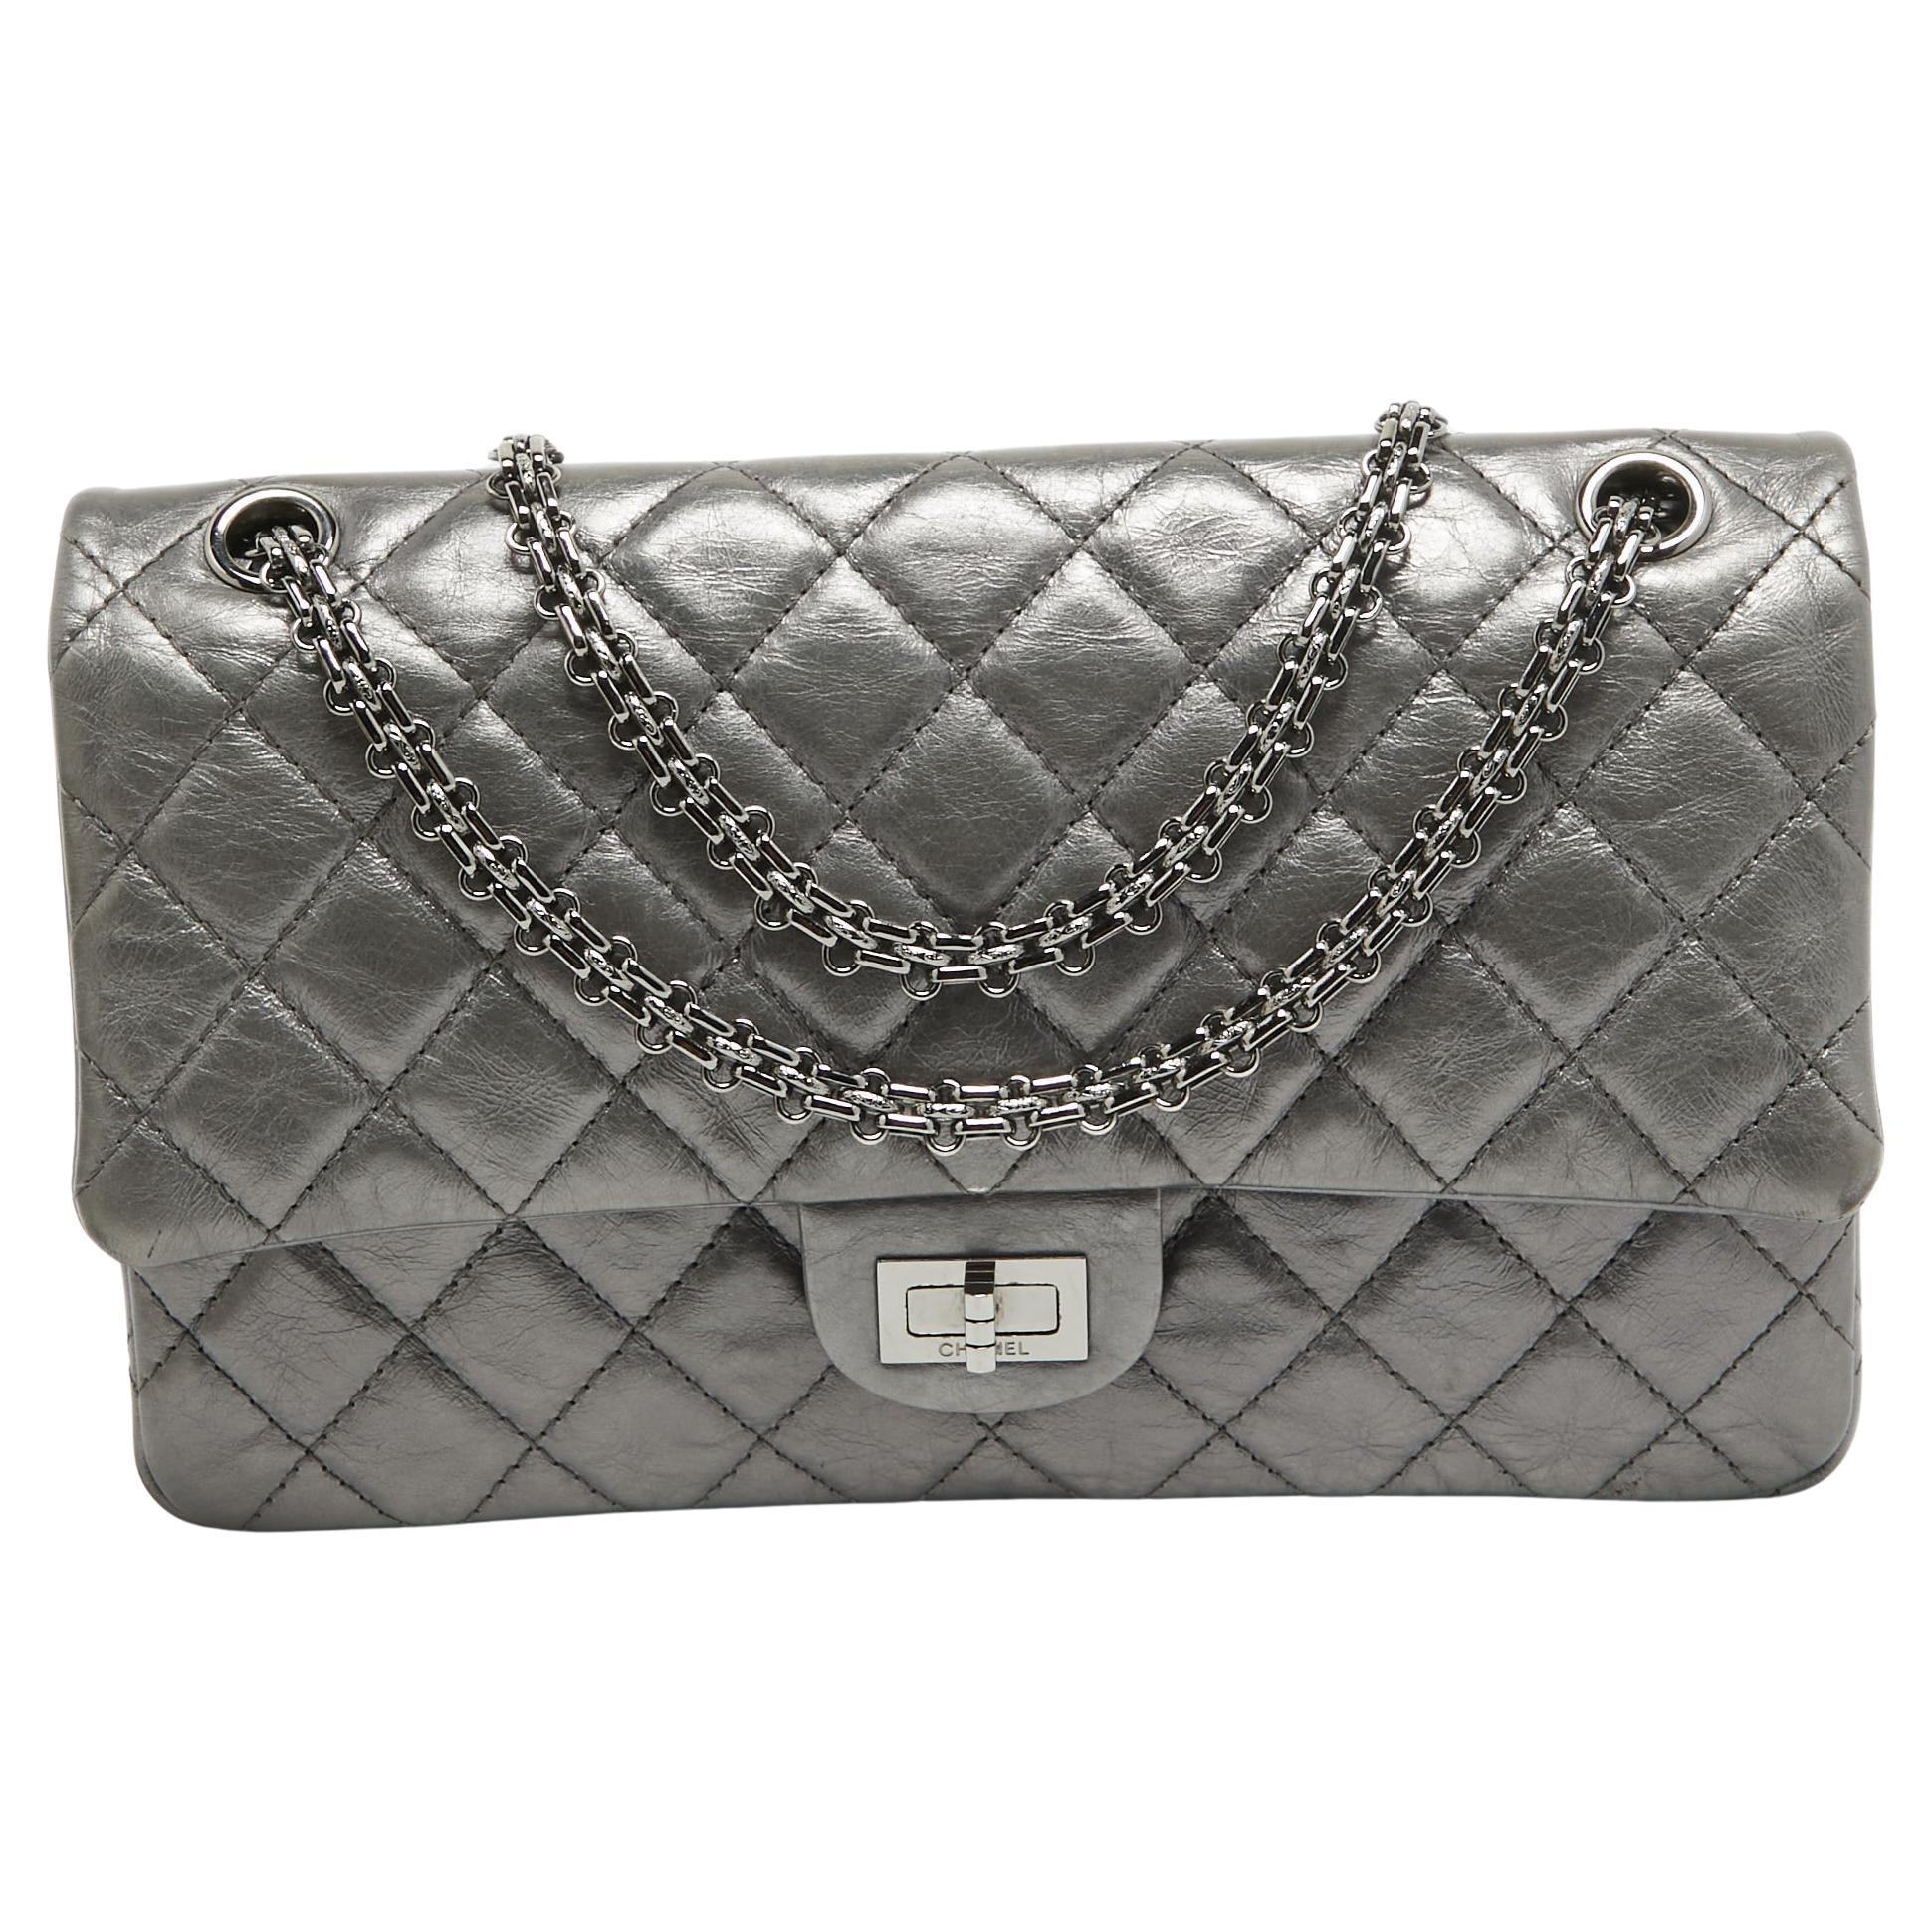 Chanel Metallic Grey Quilted Leather 226 Reissue 2.55 Flap Bag For Sale